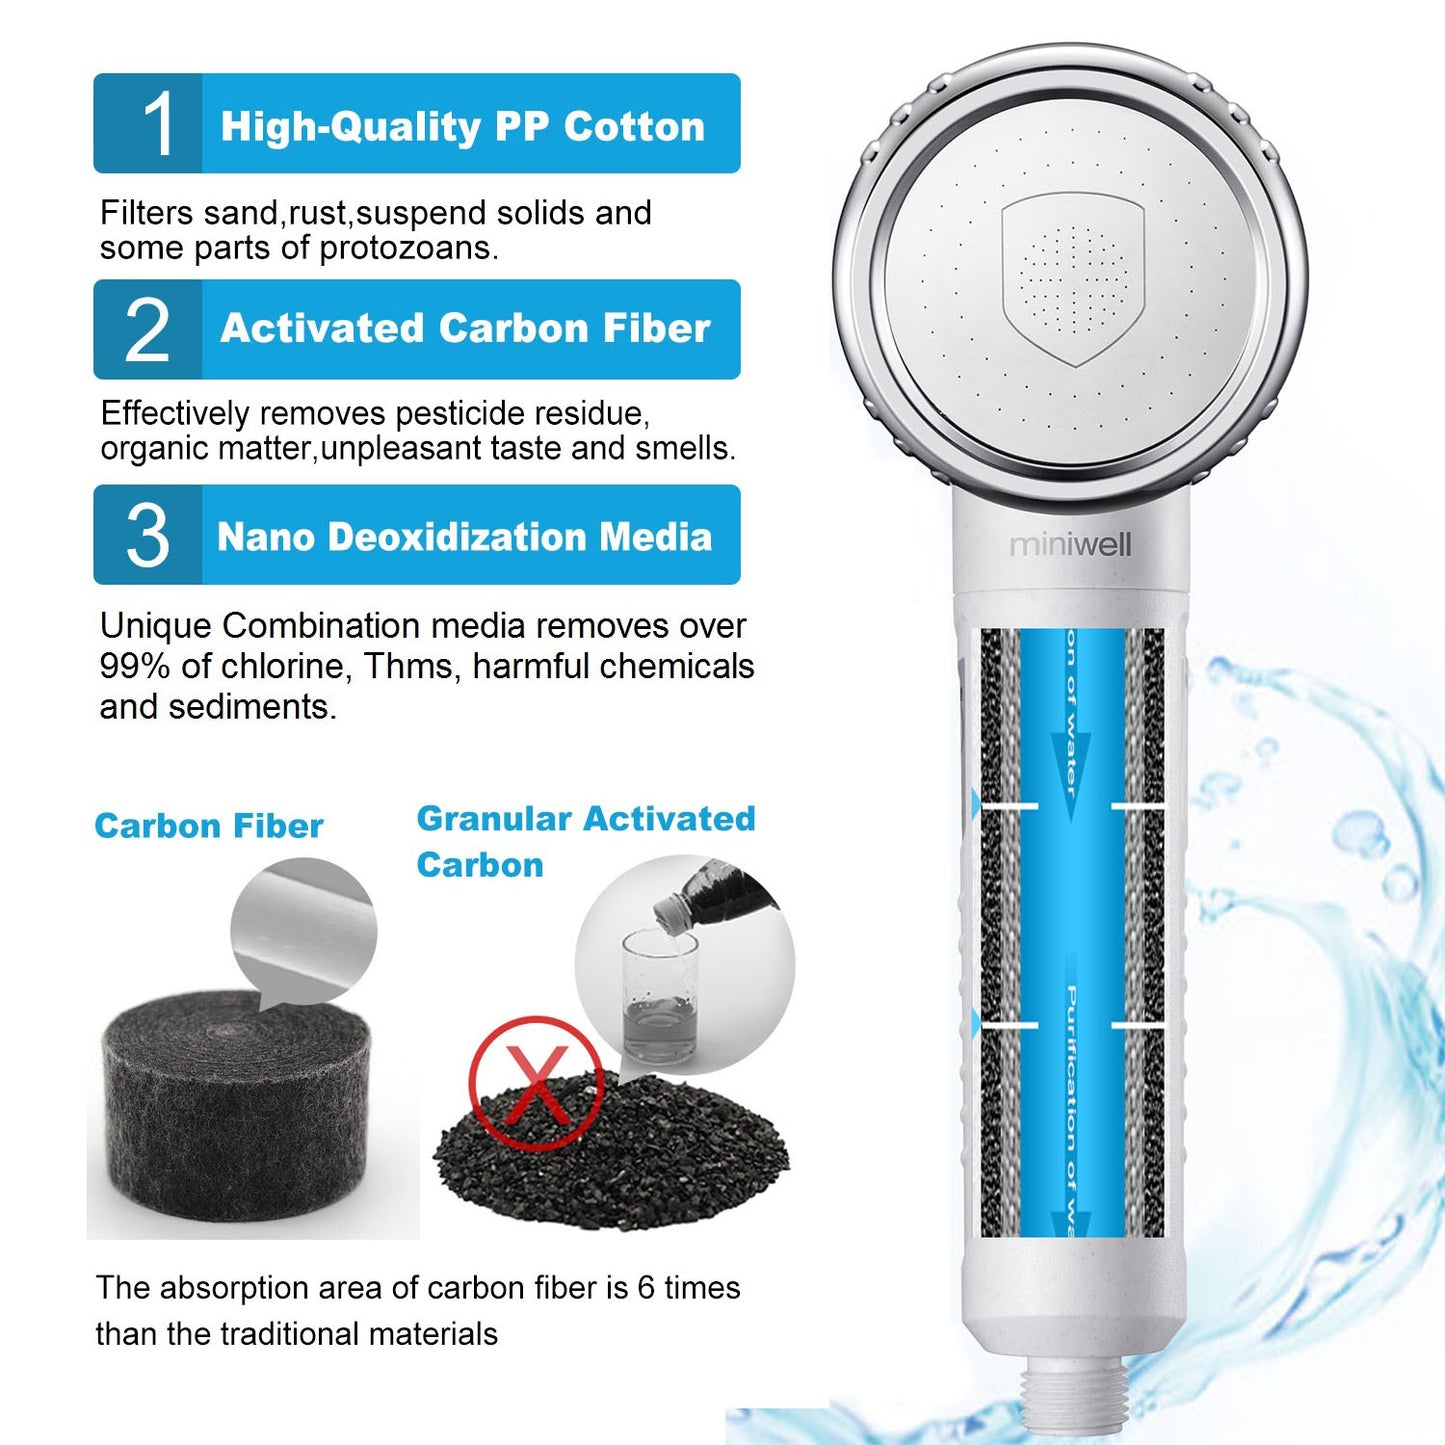 AWESOME WATER FILTER - Shower Filter - Awesome Water